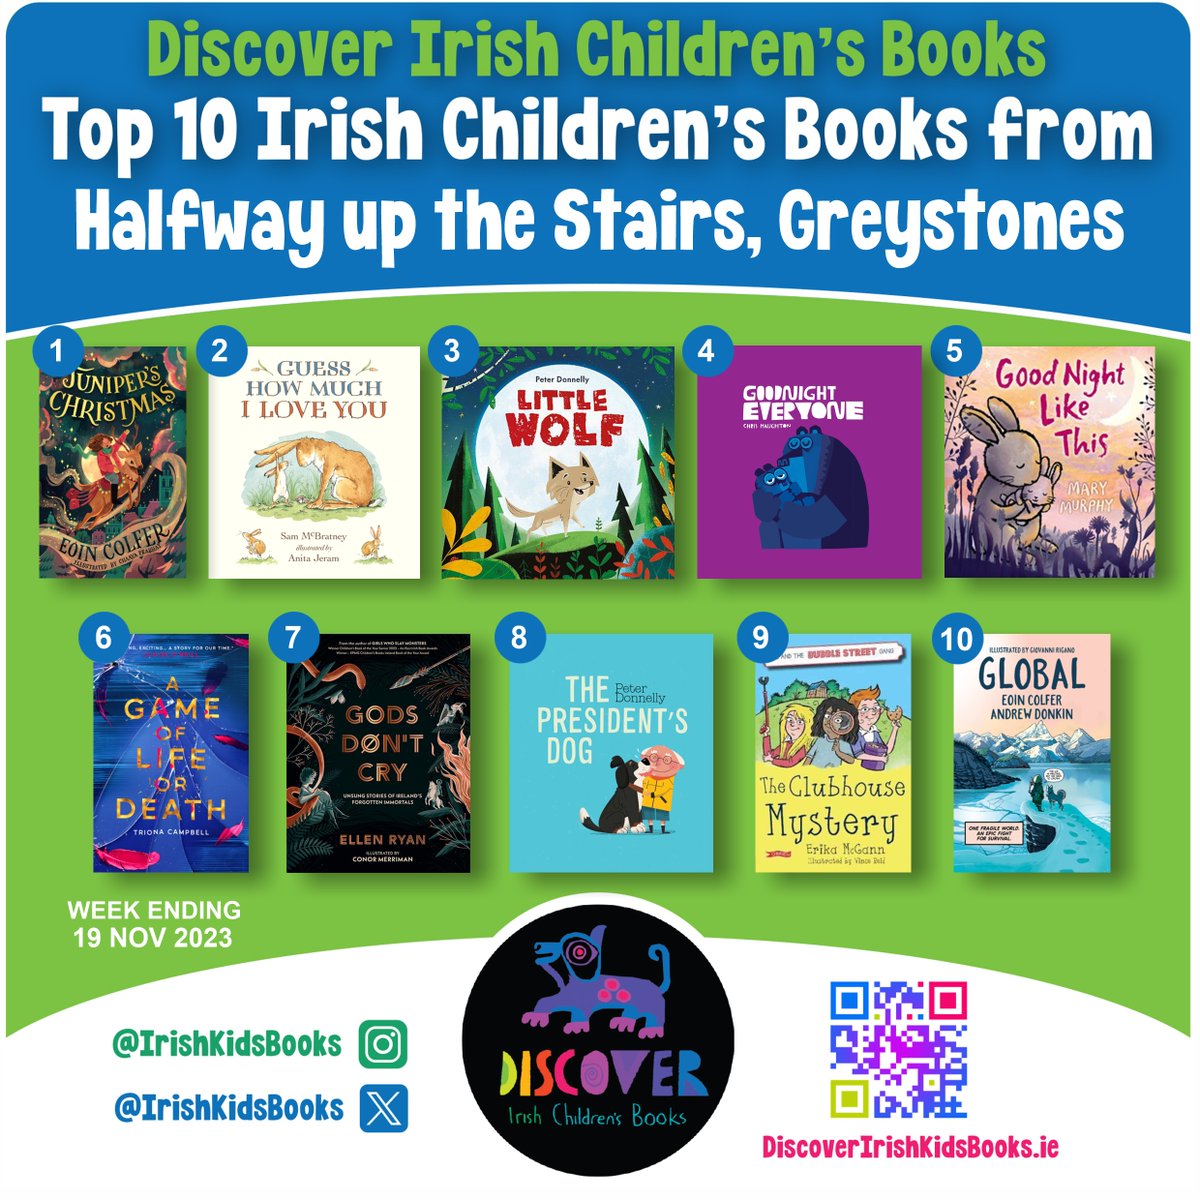 This week's Top 10 Irish Children's Books is from @HalfwayUpBooks in Greystones, Co Wicklow - winner of @AnPostIBAS Bookshop of the Year this week - well done to them!
Congrats to the no 1 book by @EoinColfer Juniper's Christmas. And 2 titles from Greystones local @donnellypa